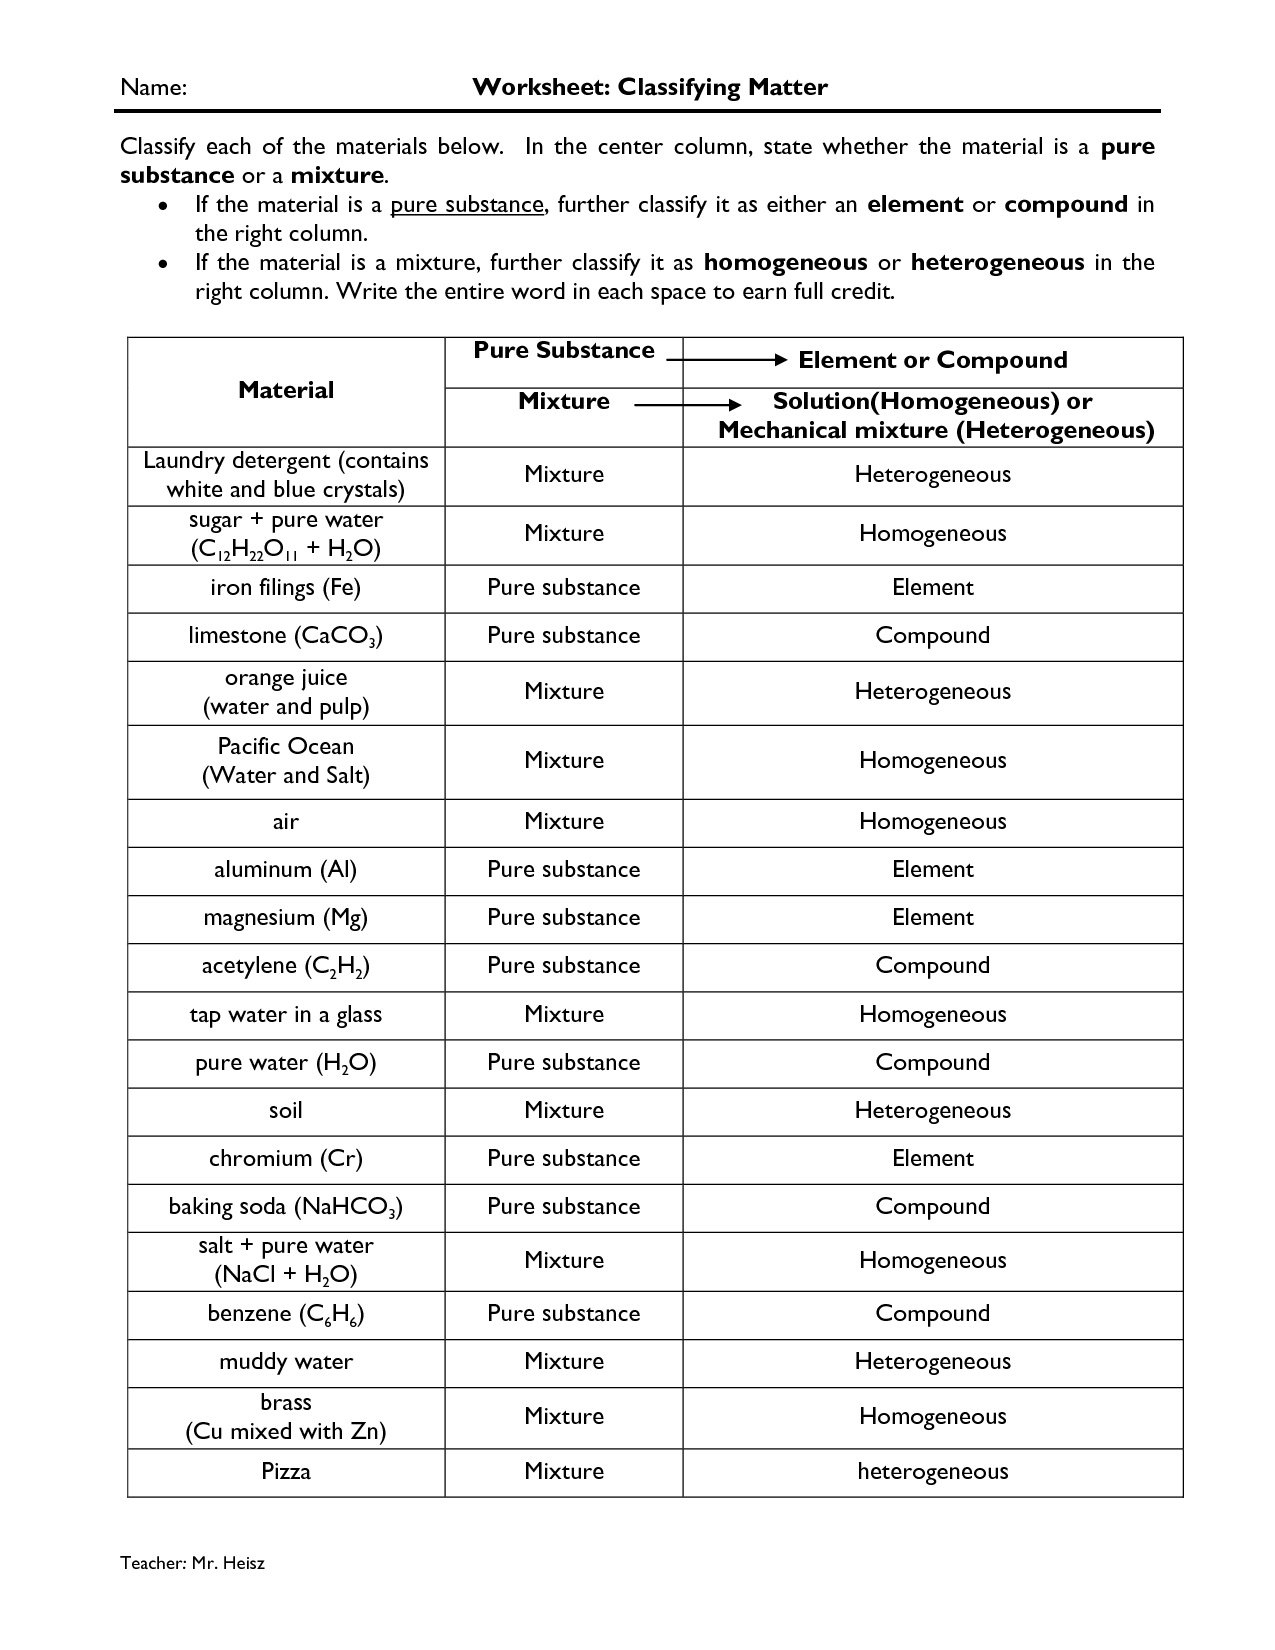 Chemistry Worksheet Matter #21 Answers  mypromosource.com.au With Regard To Classifying Matter Worksheet Answers